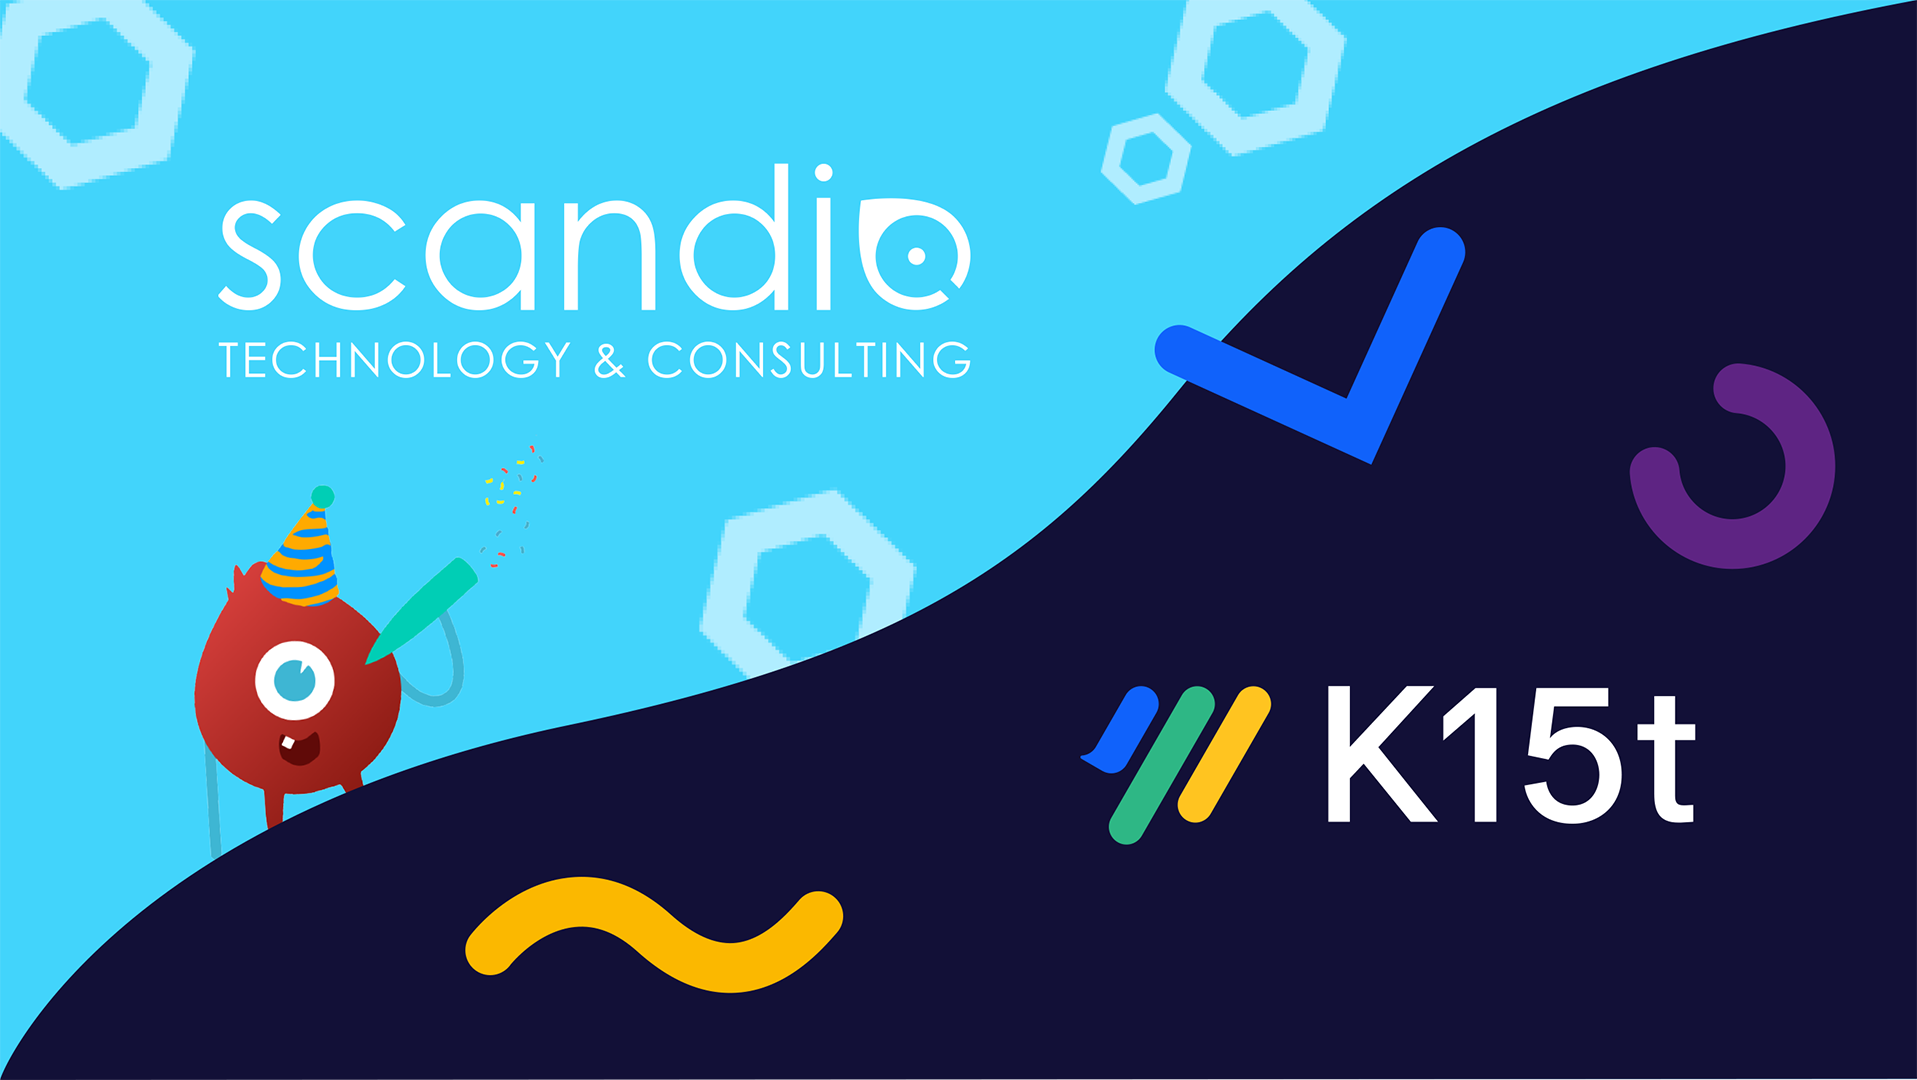 Welcome aboard - K15t Consulting to become part of Scandio